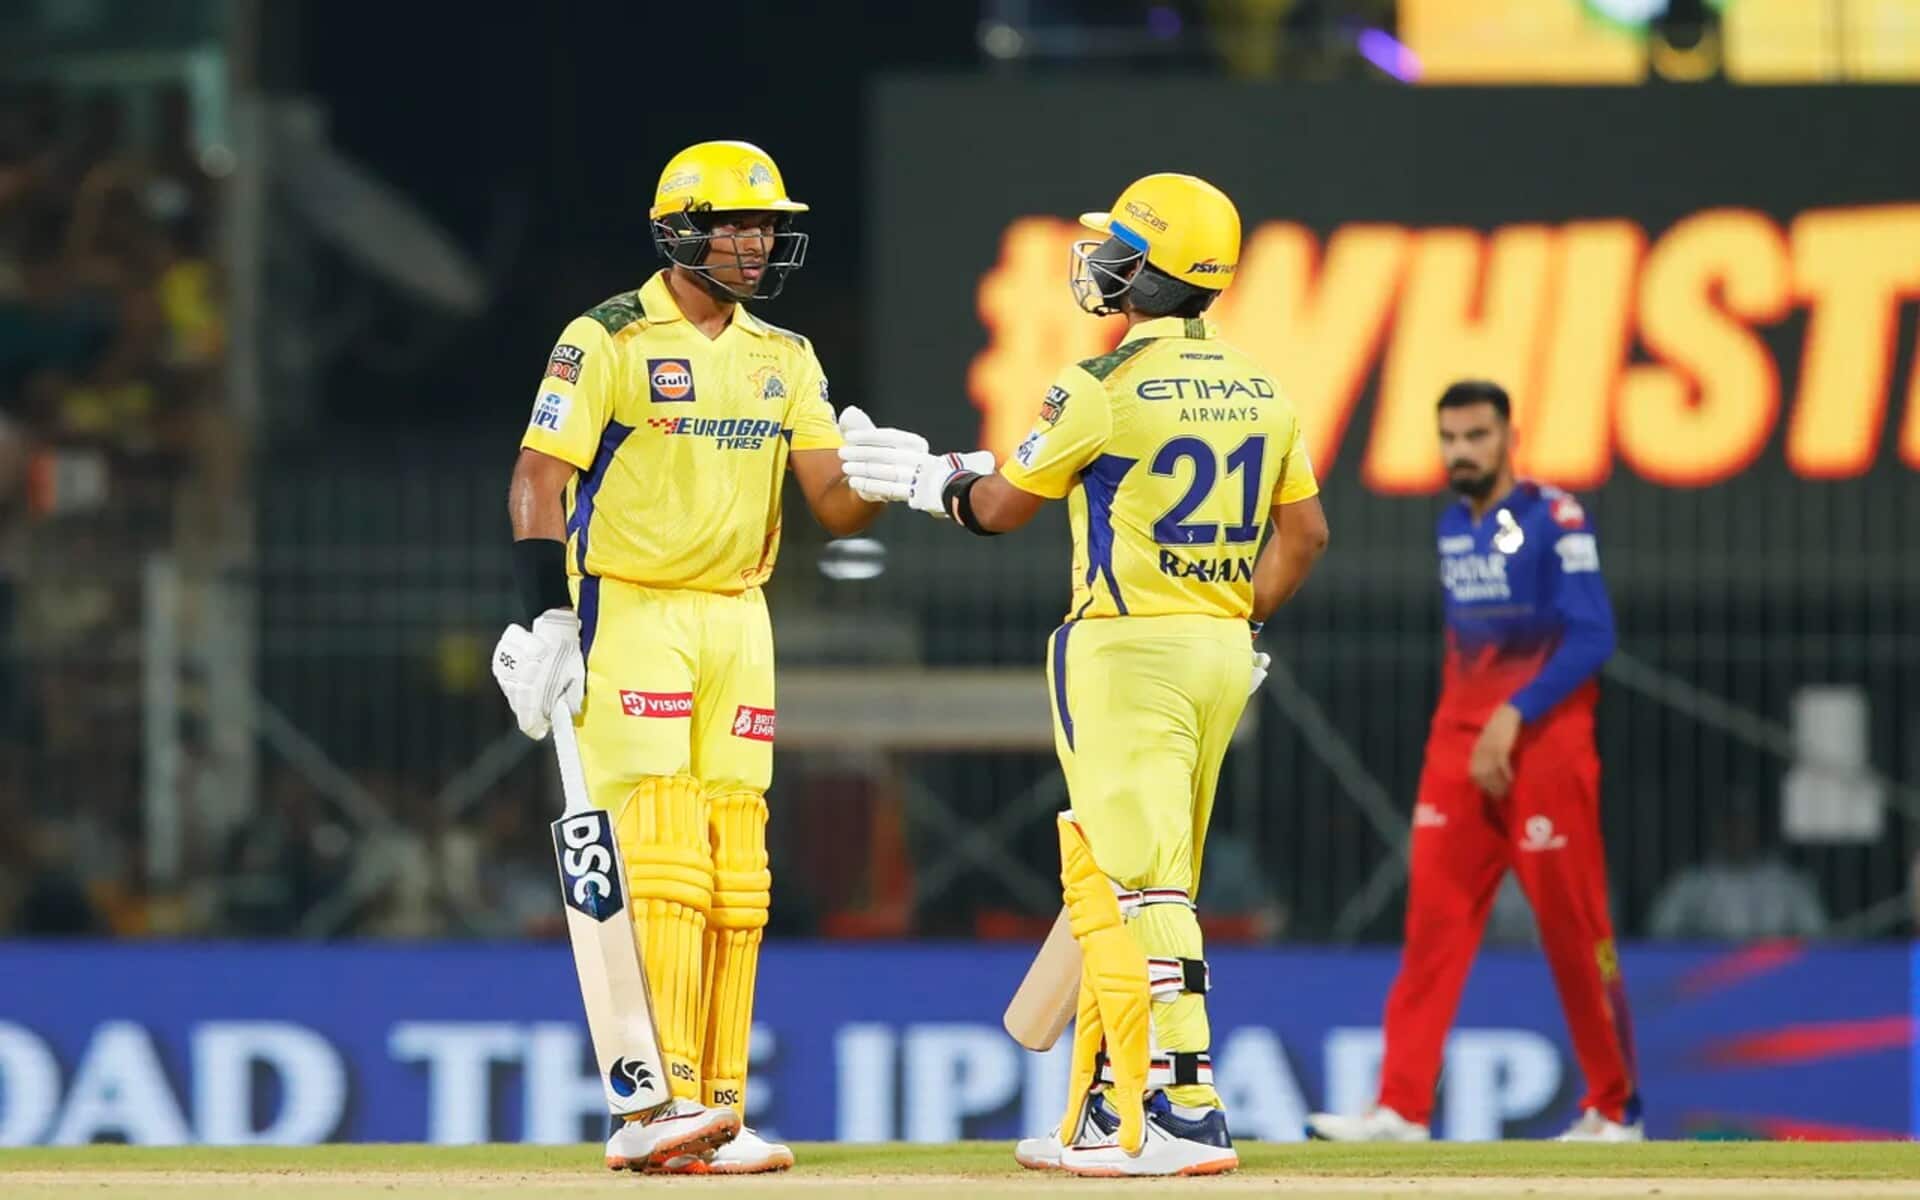 Ravindra and Rahane are taking CSK to safer shores (Source: IPL)